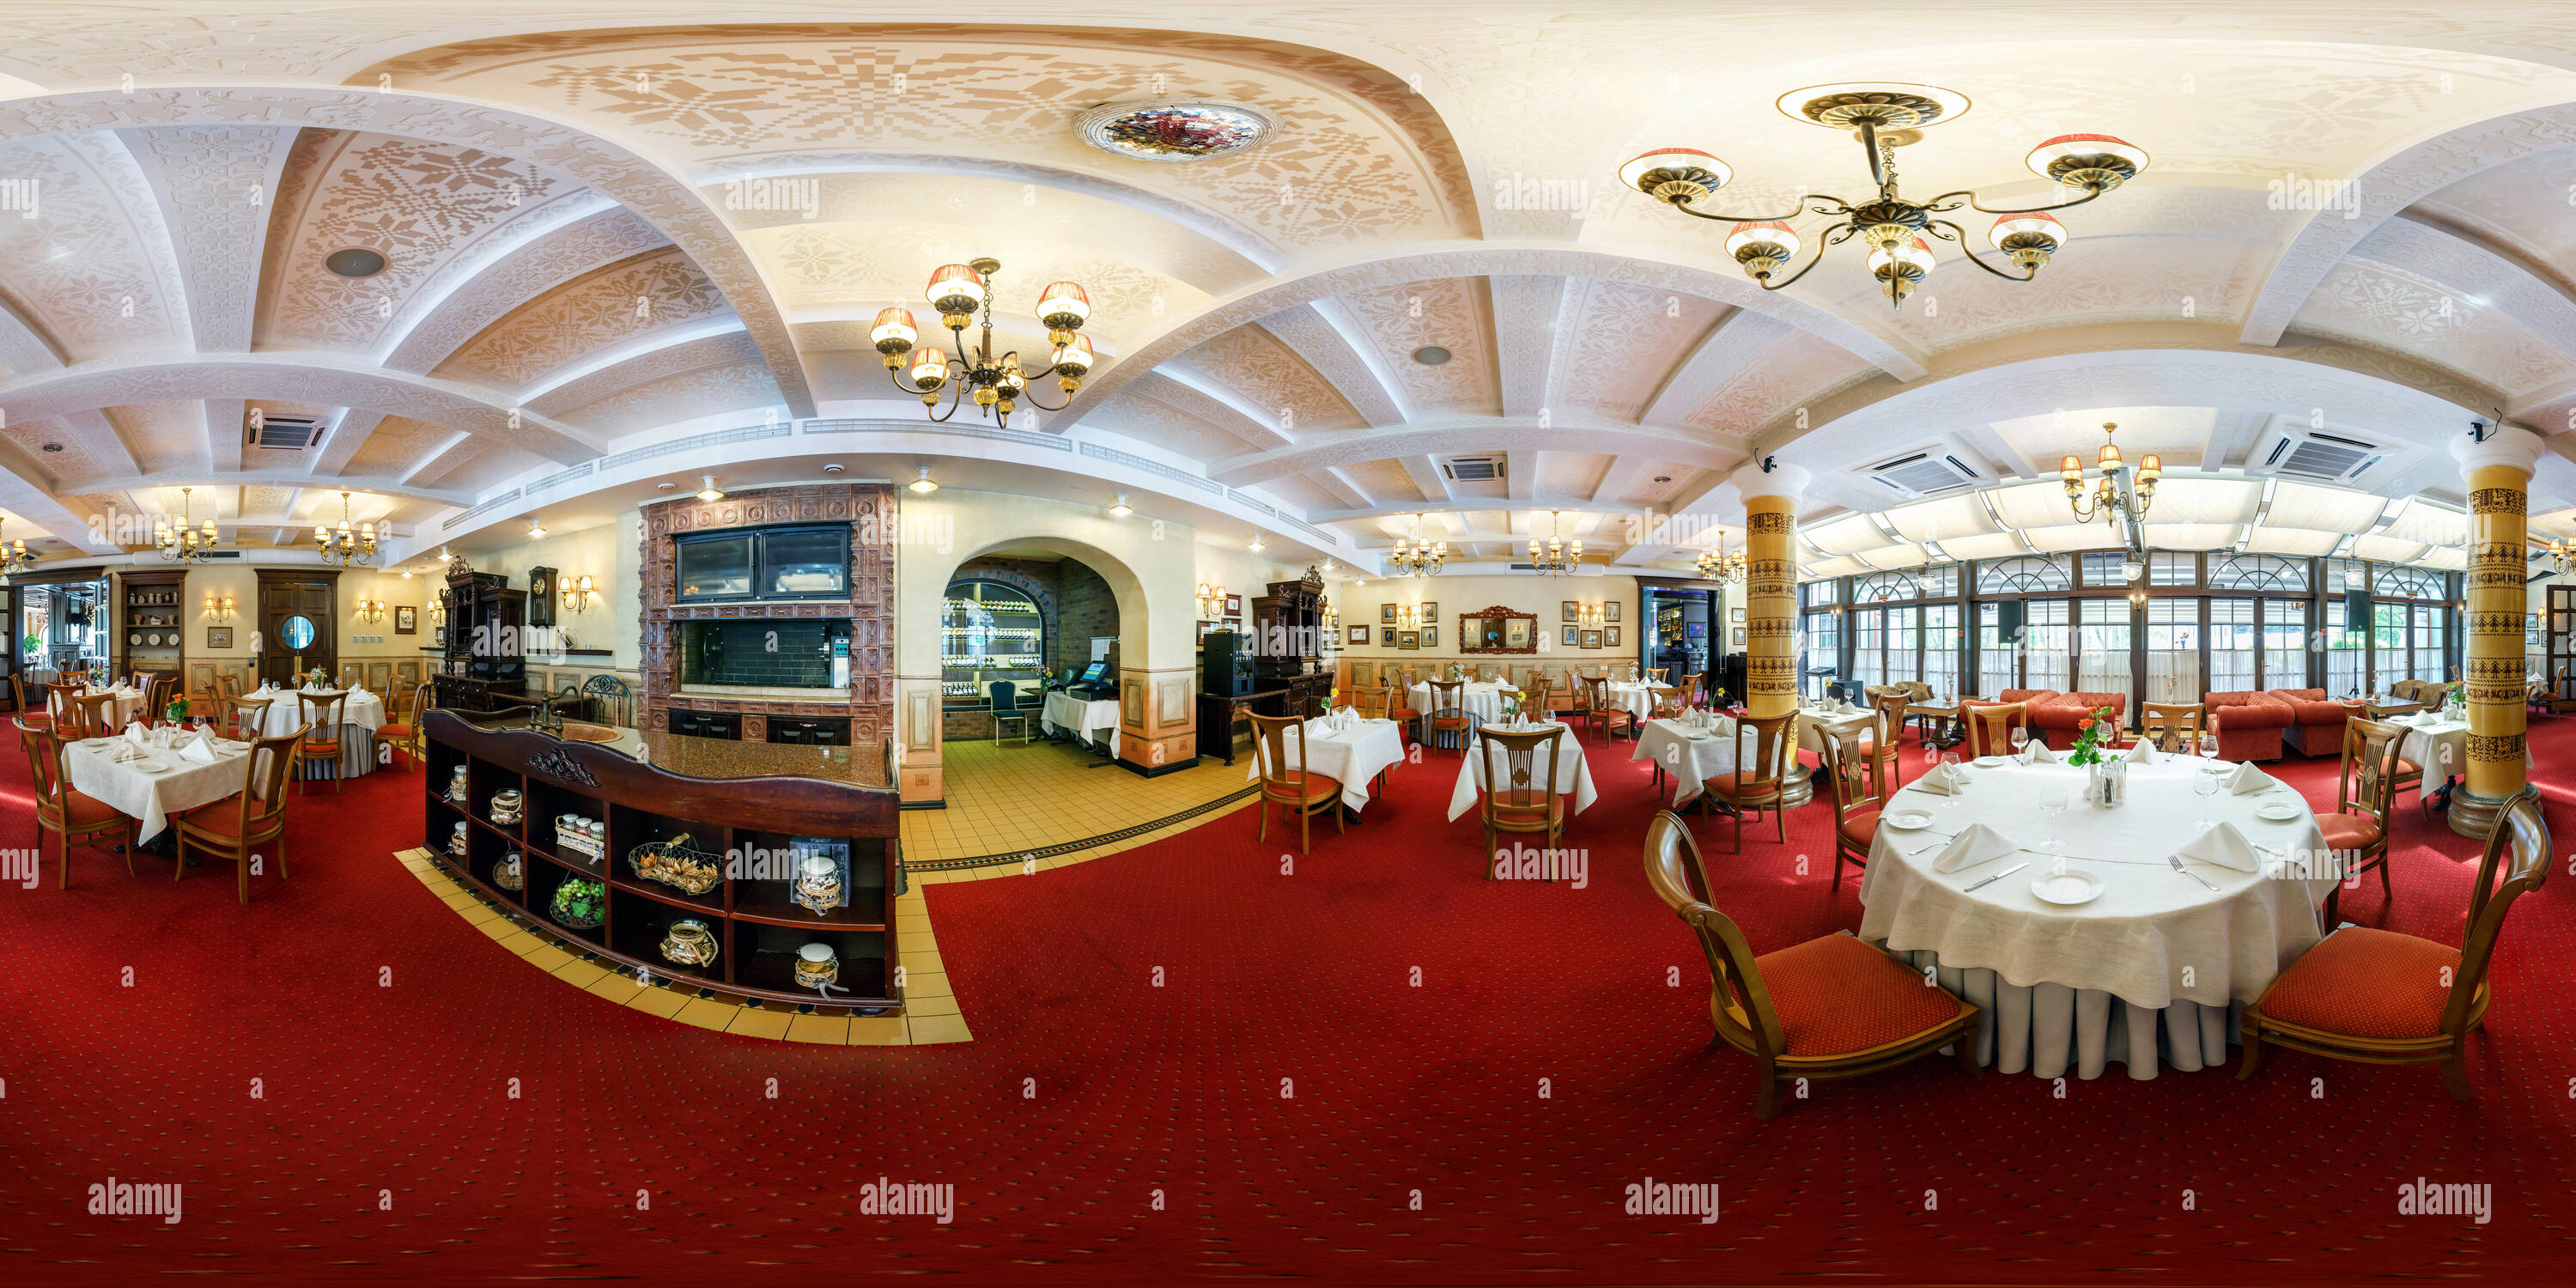 360 degree panoramic view of BREST, BELARUS - APRIL 27, 2014: Modern interior,  ace panorama, full 360 panorama in equirectangular spherical projection in cafe, VR content